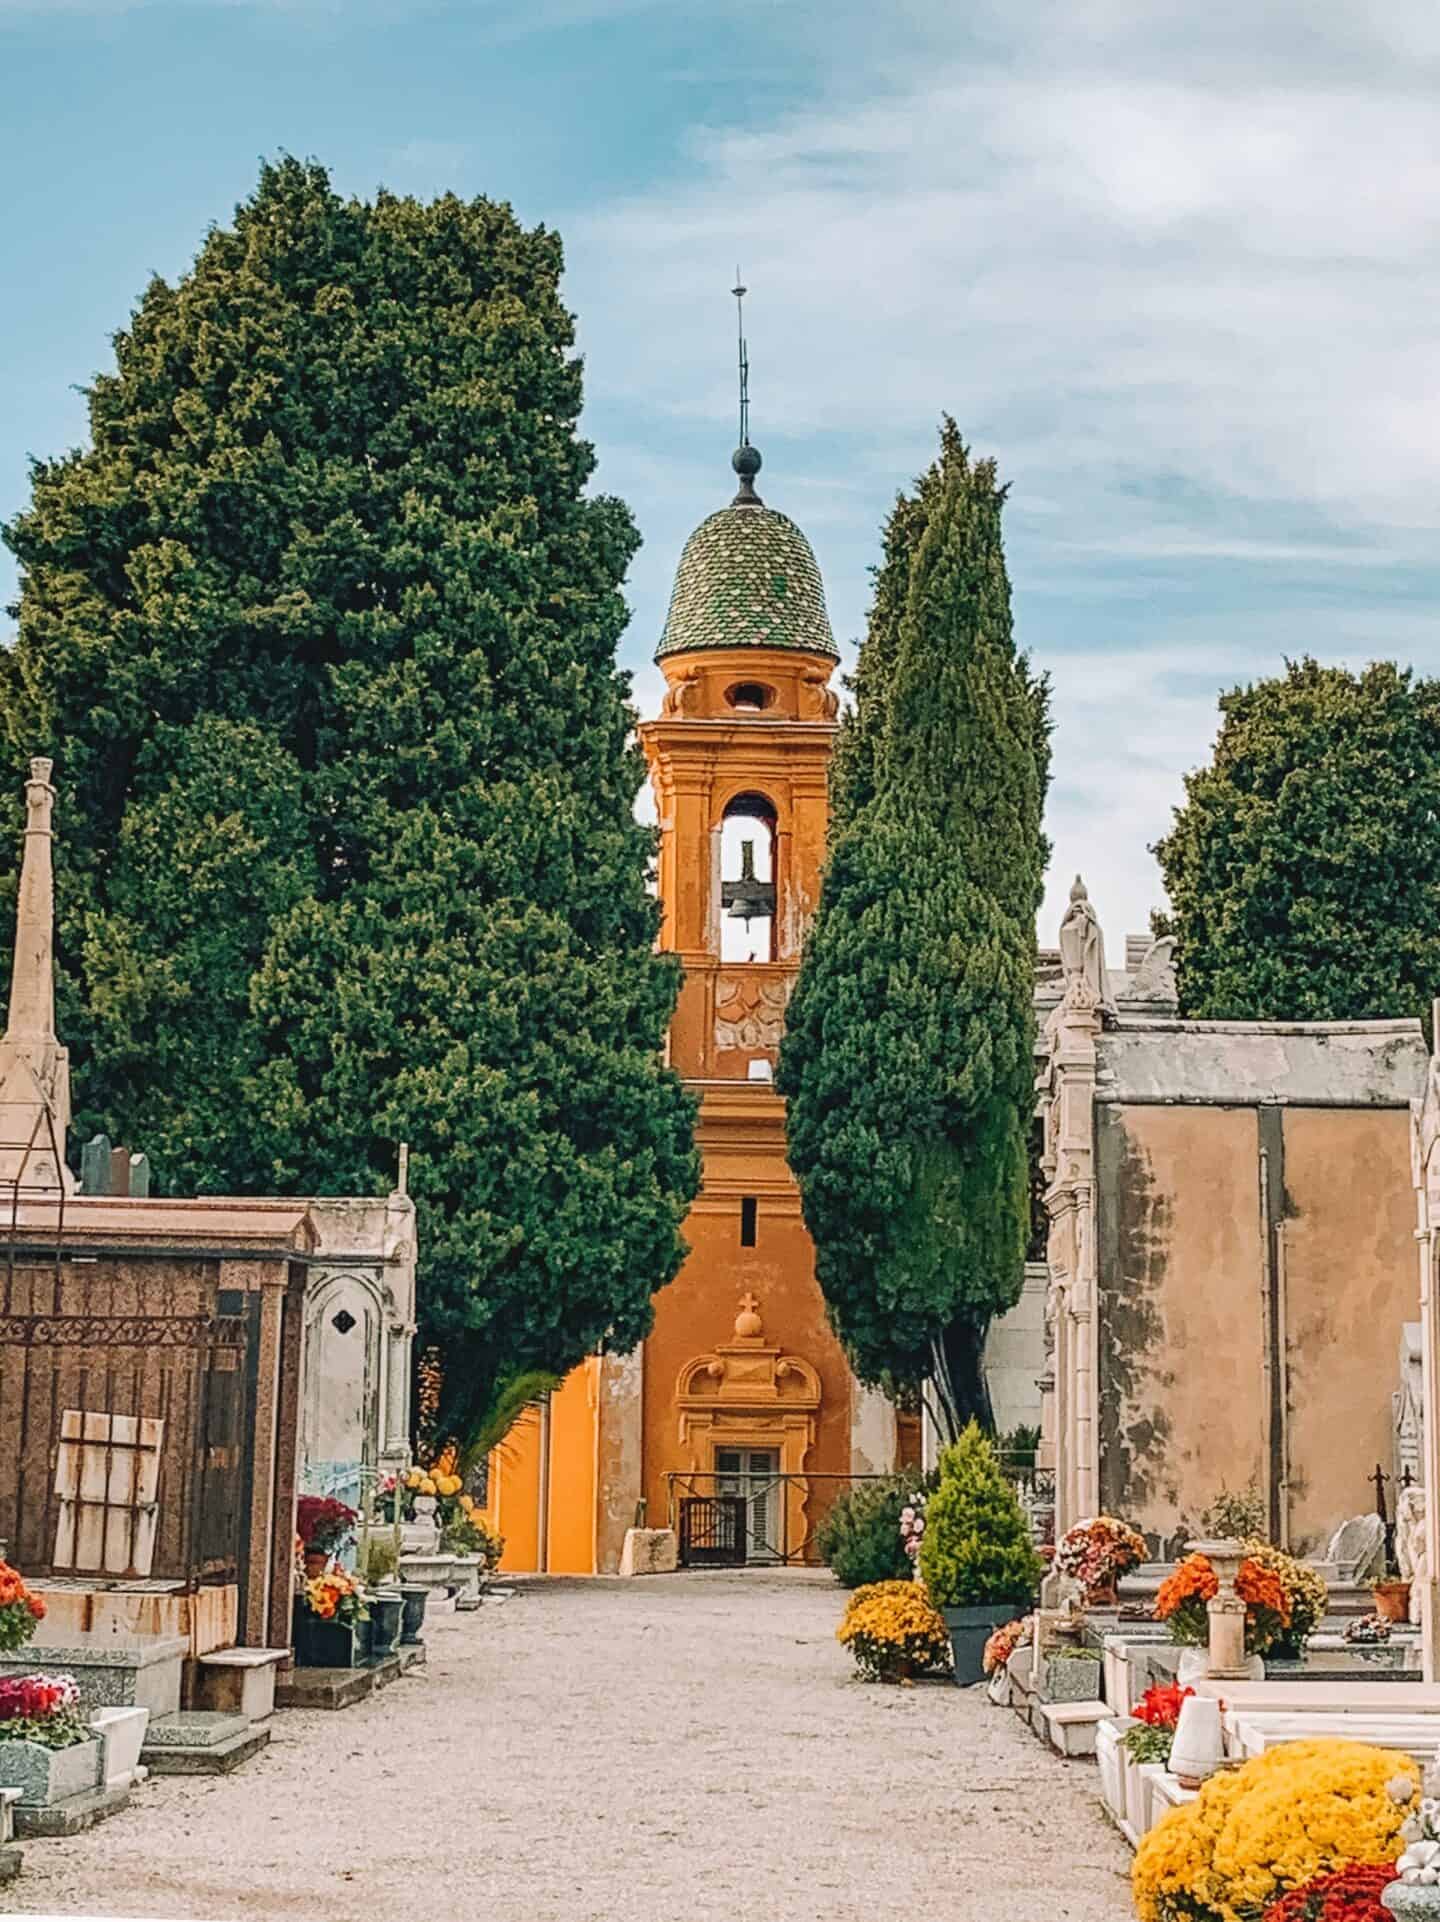 The Cimetière du Château is one of the best things to do during two days in the French Riviera